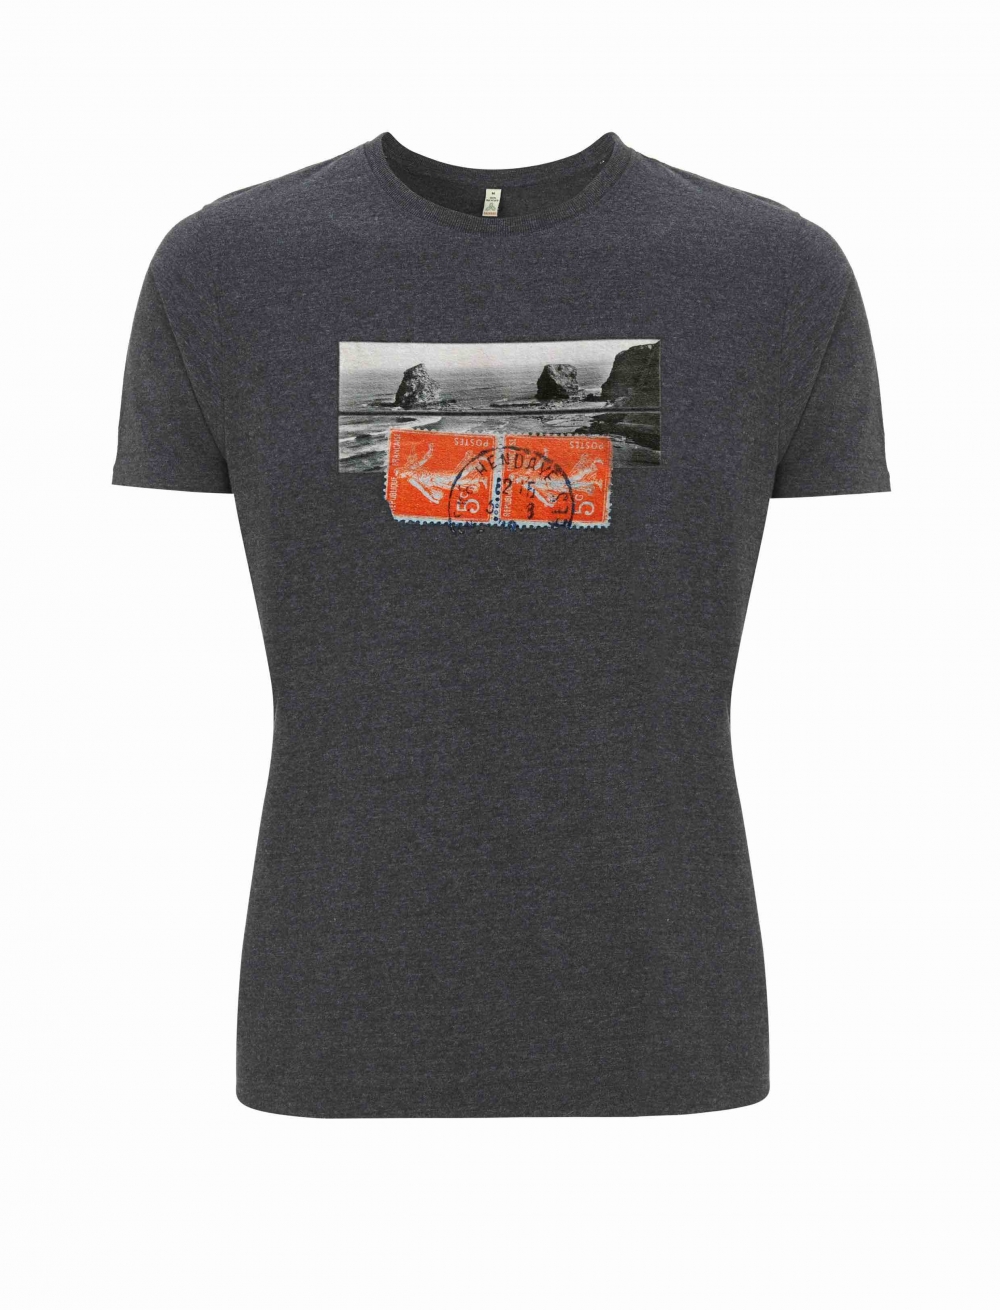 Recycled classic t-shirt with a vintage image of Hendaye